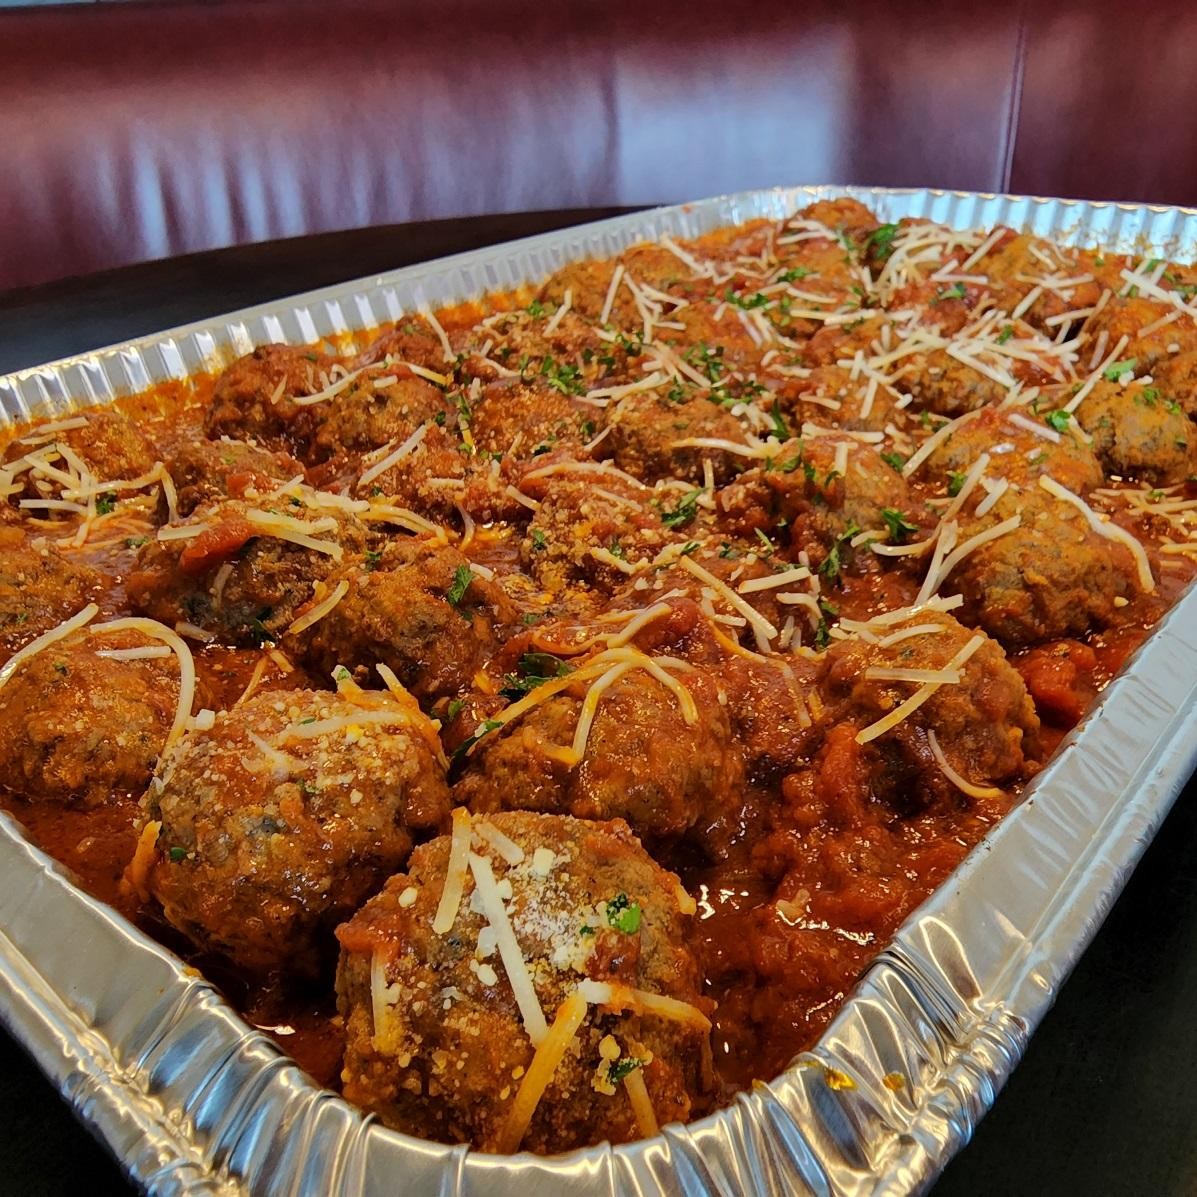 Meatballs with sauce